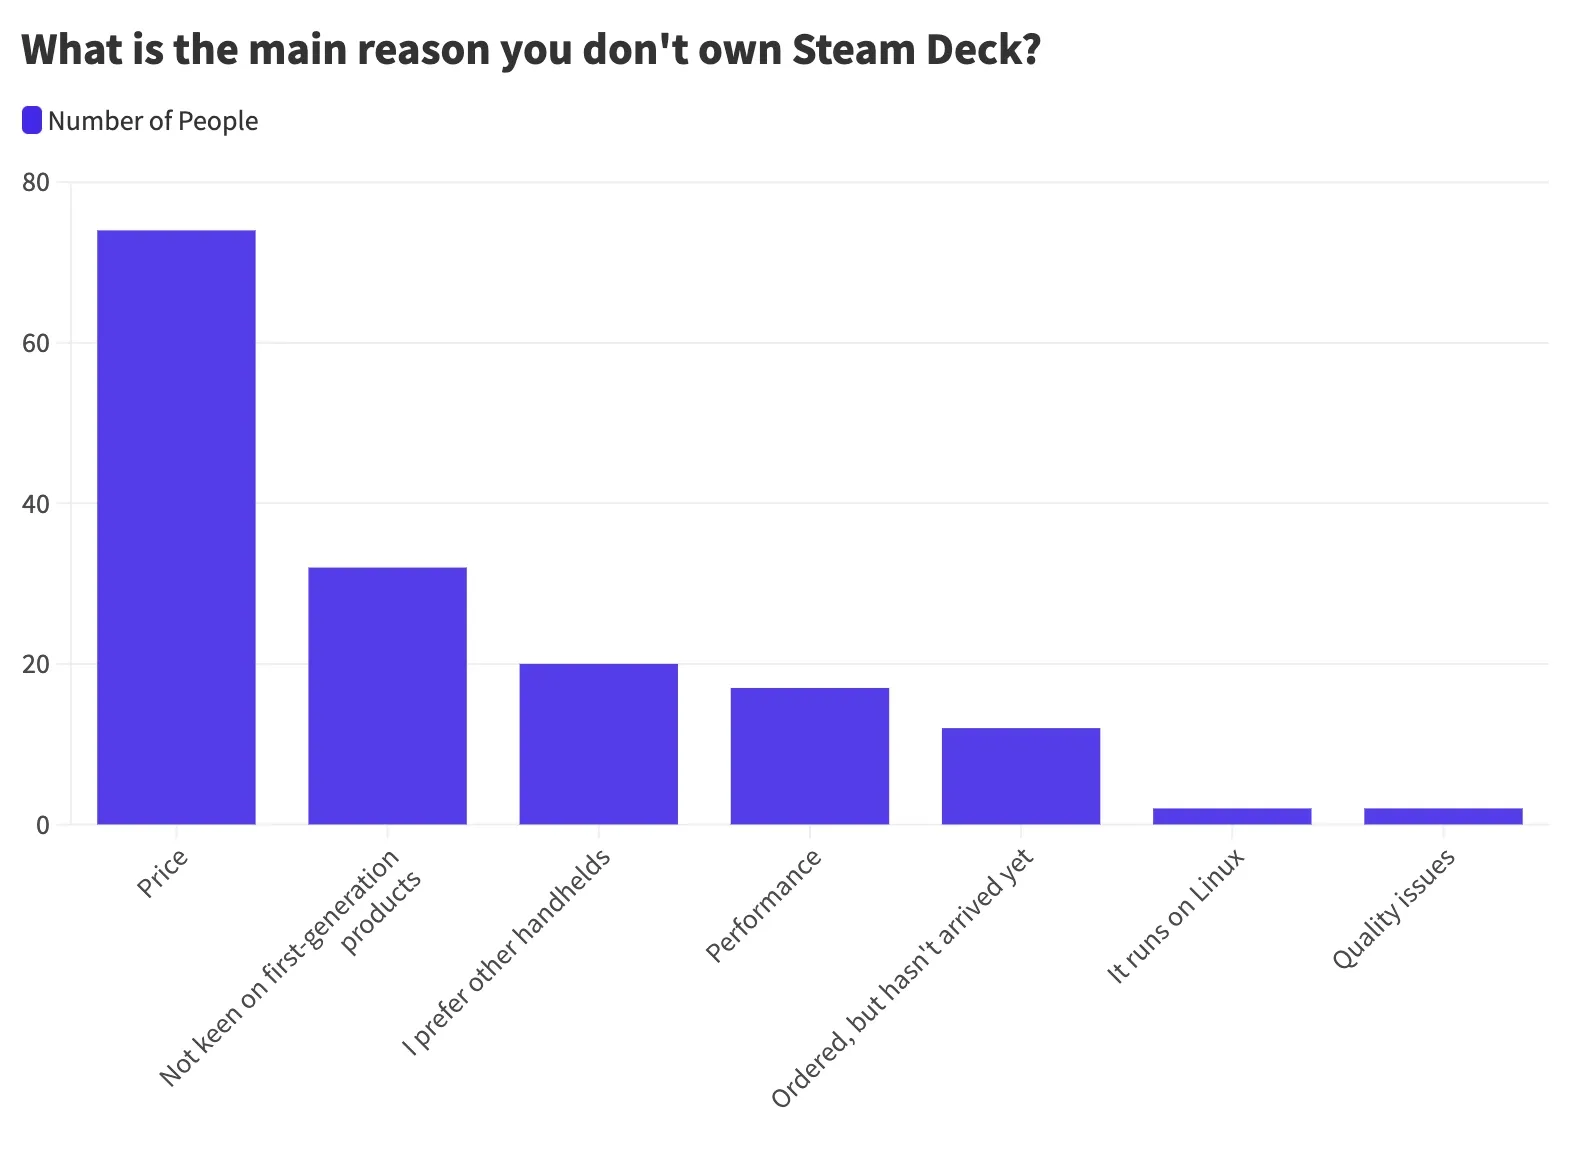 Hogwarts Legacy, Elden Ring, and Stardew Valley Lead 20 Most-Played Games  on Steam Deck for March 2023